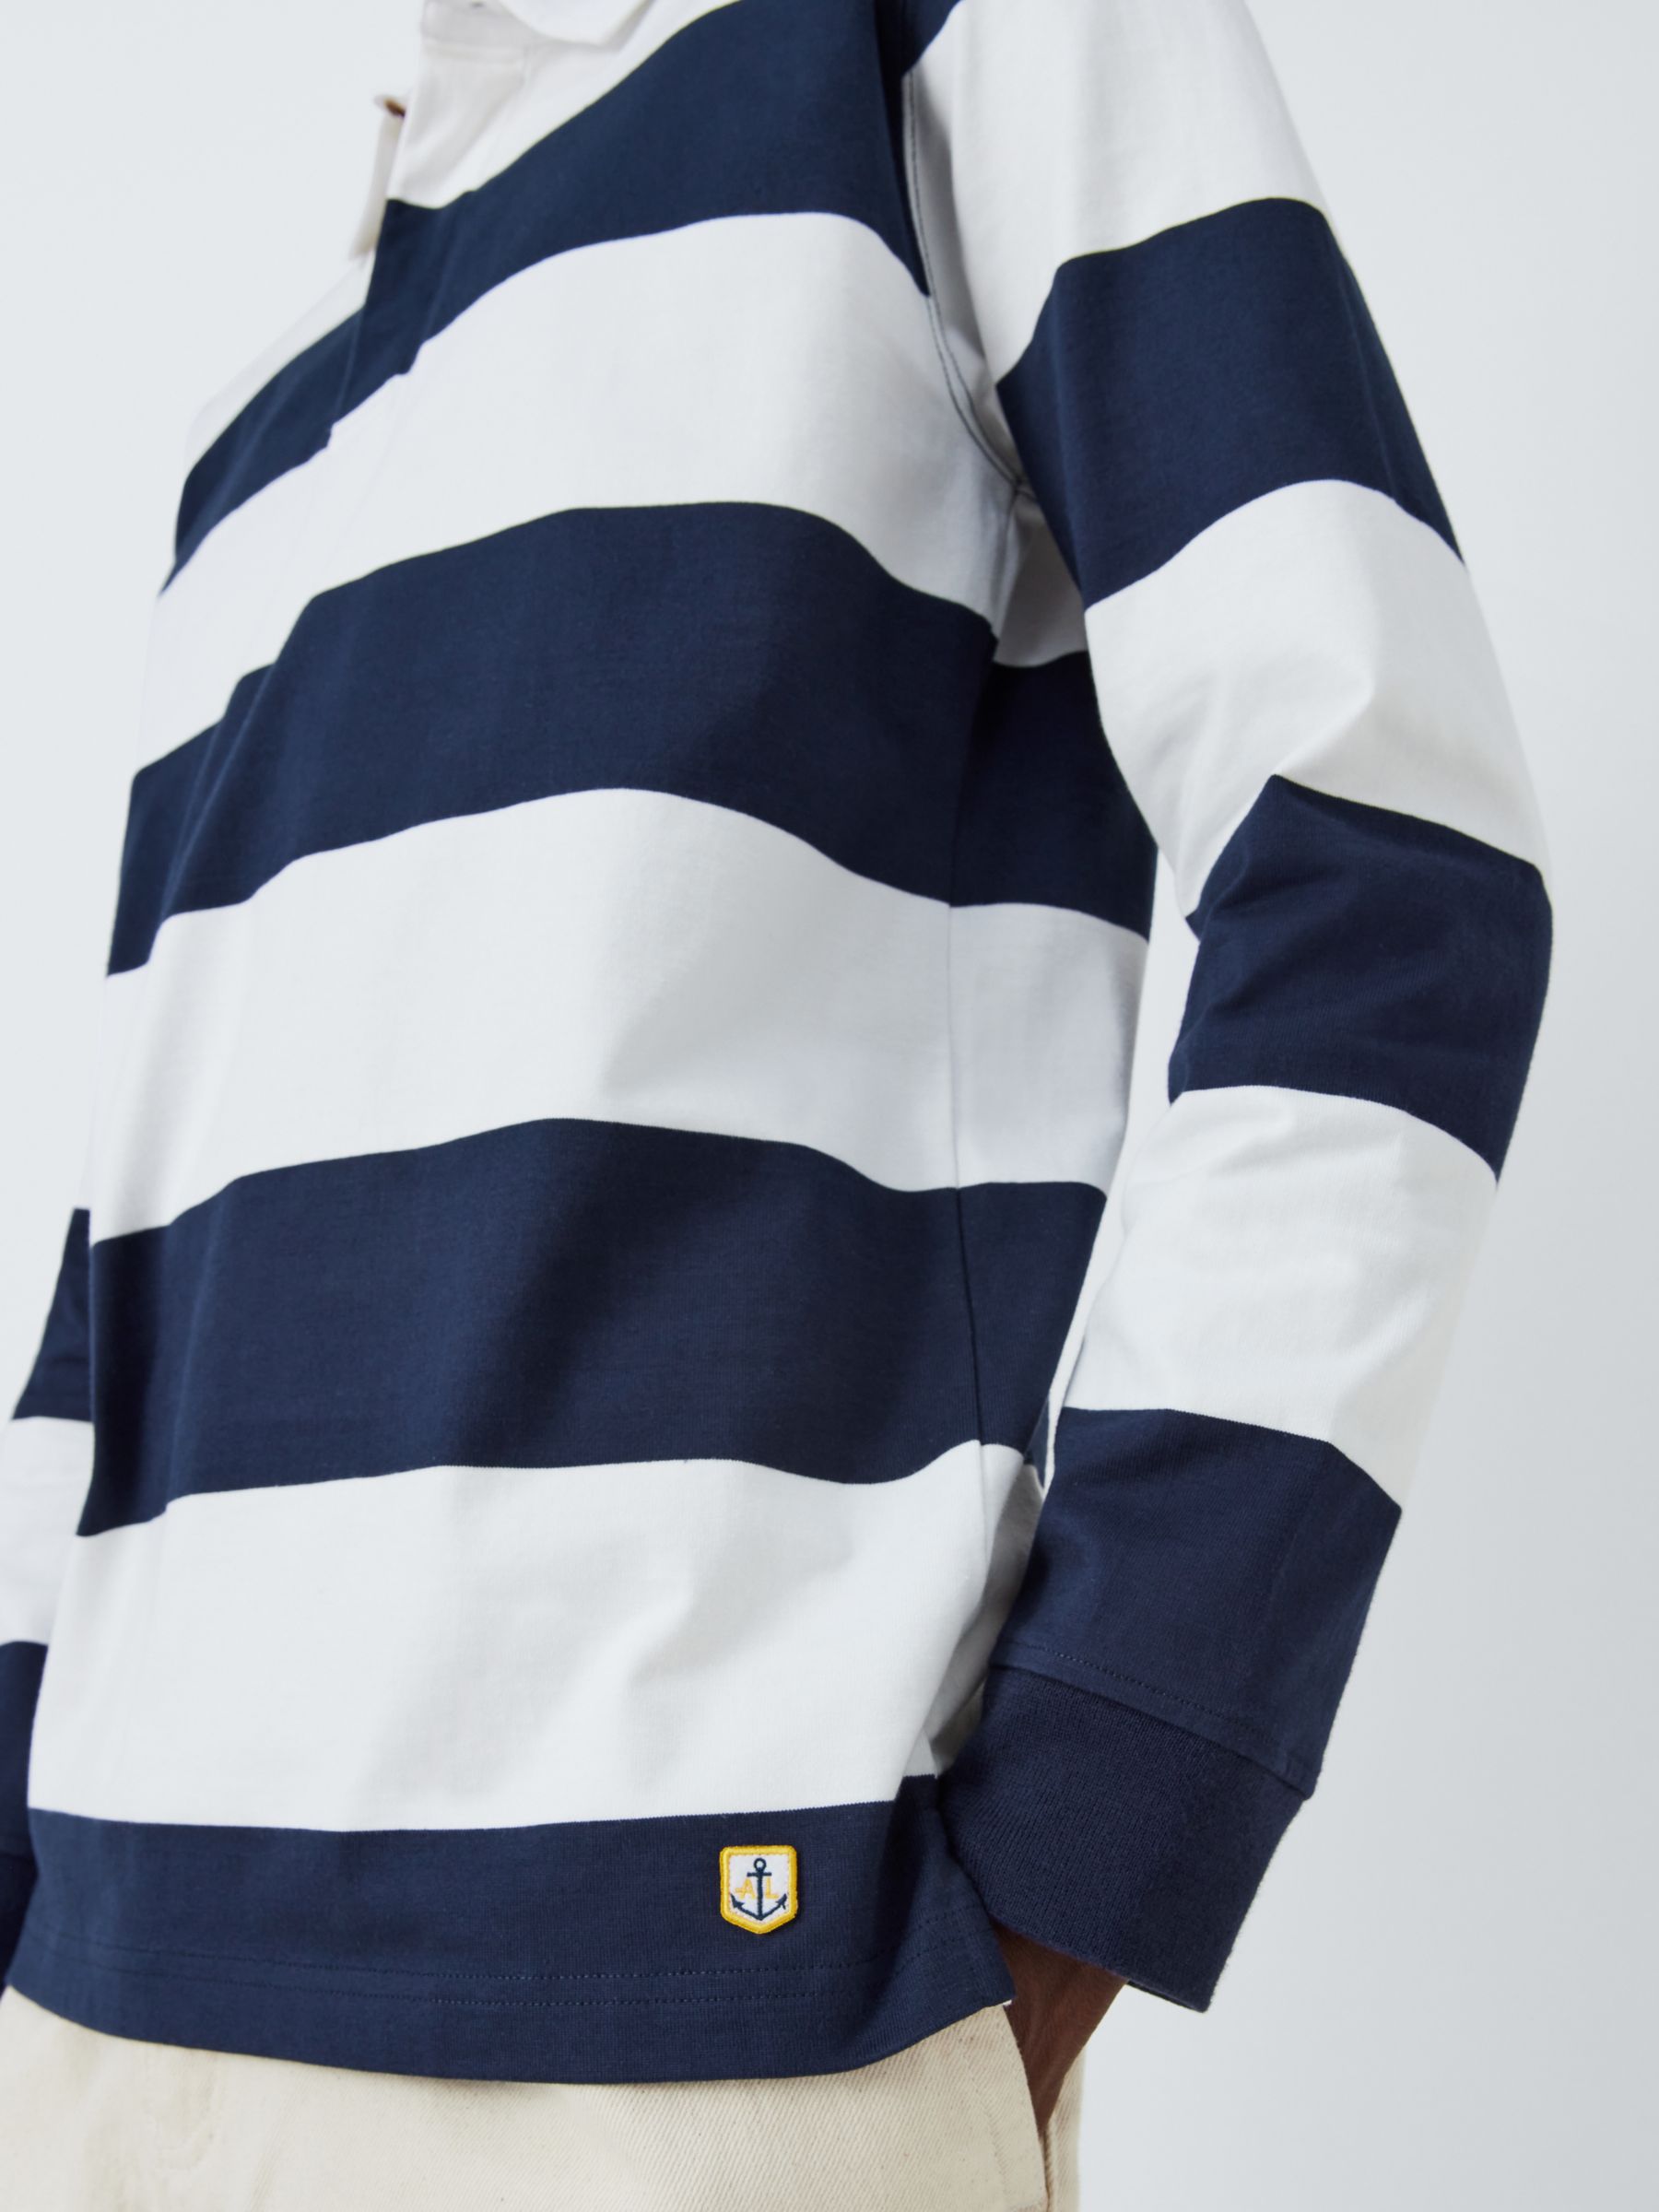 Armor Lux Long Sleeve Striped Polo Shirt, Navy/White, S